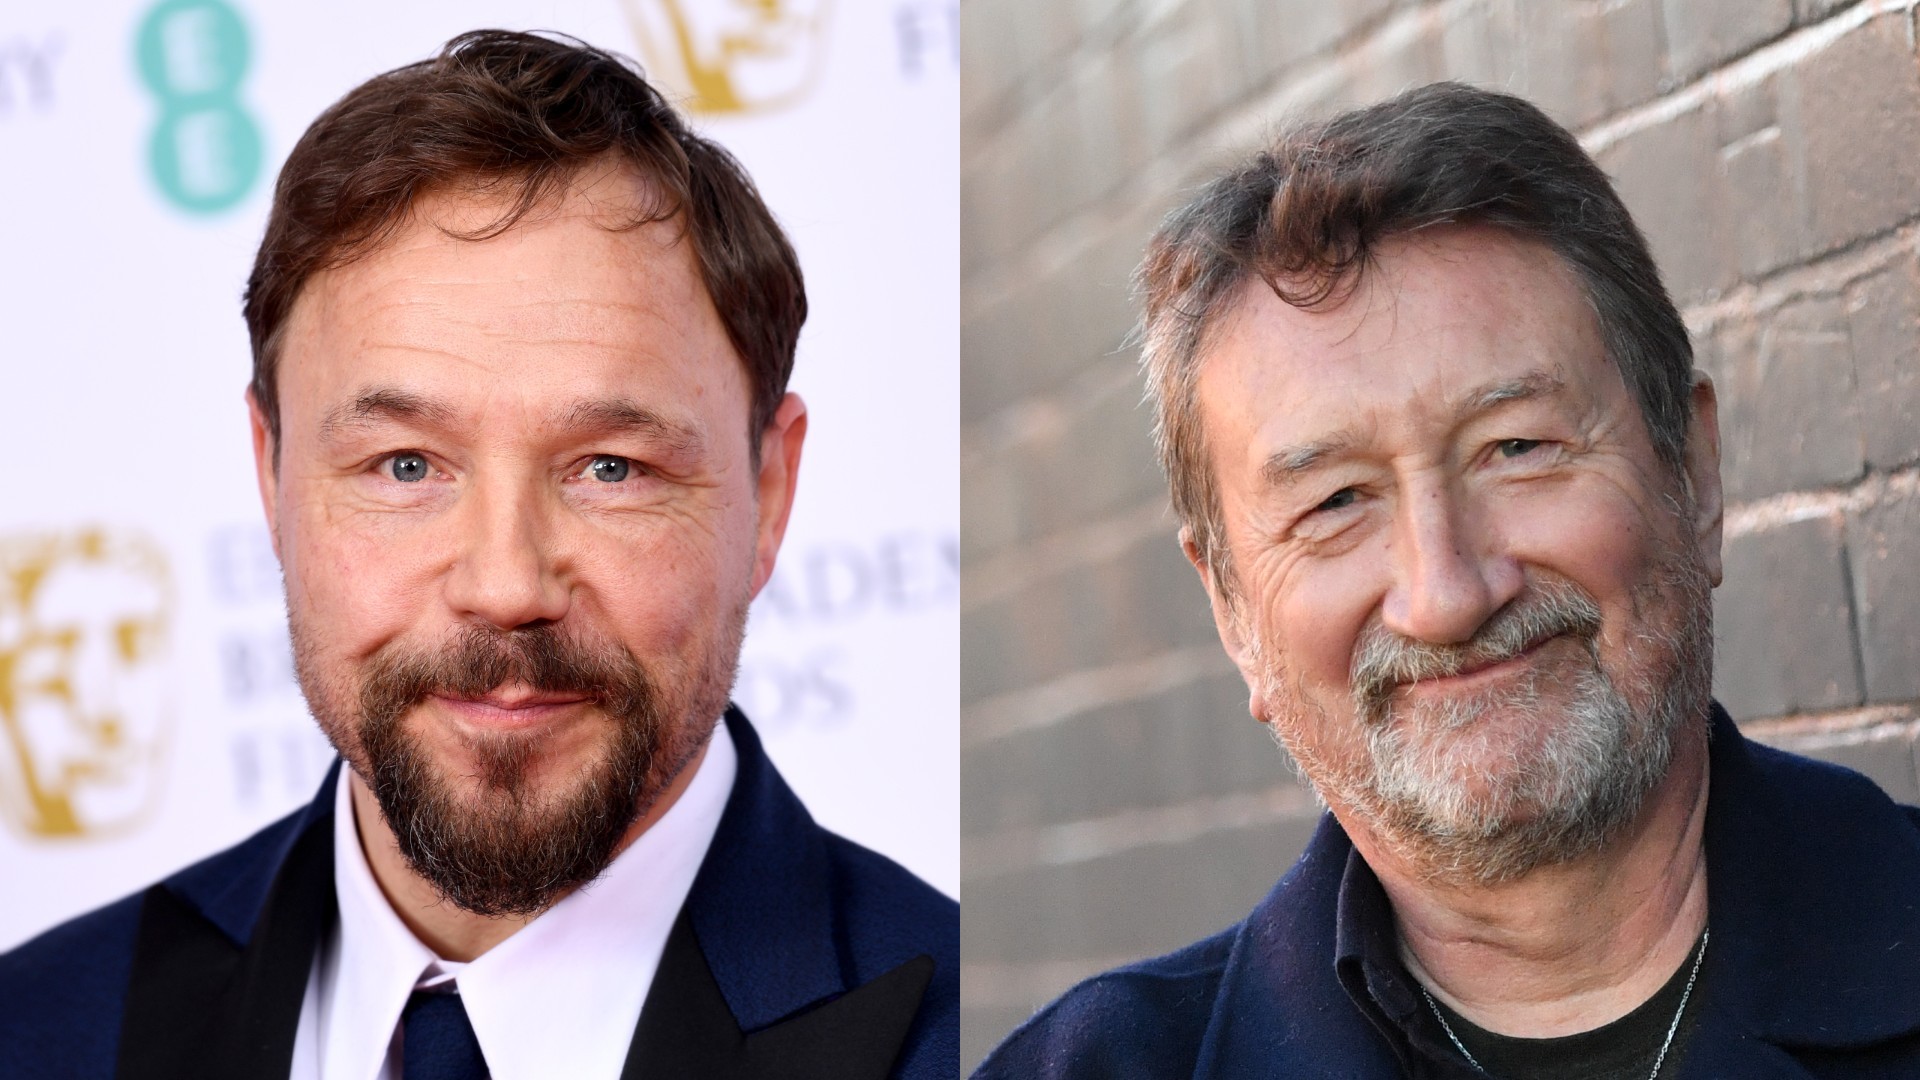 Casting News: Stephen Graham to Star in Steven Knight's Boxing Drama 'A Thousand Blows'